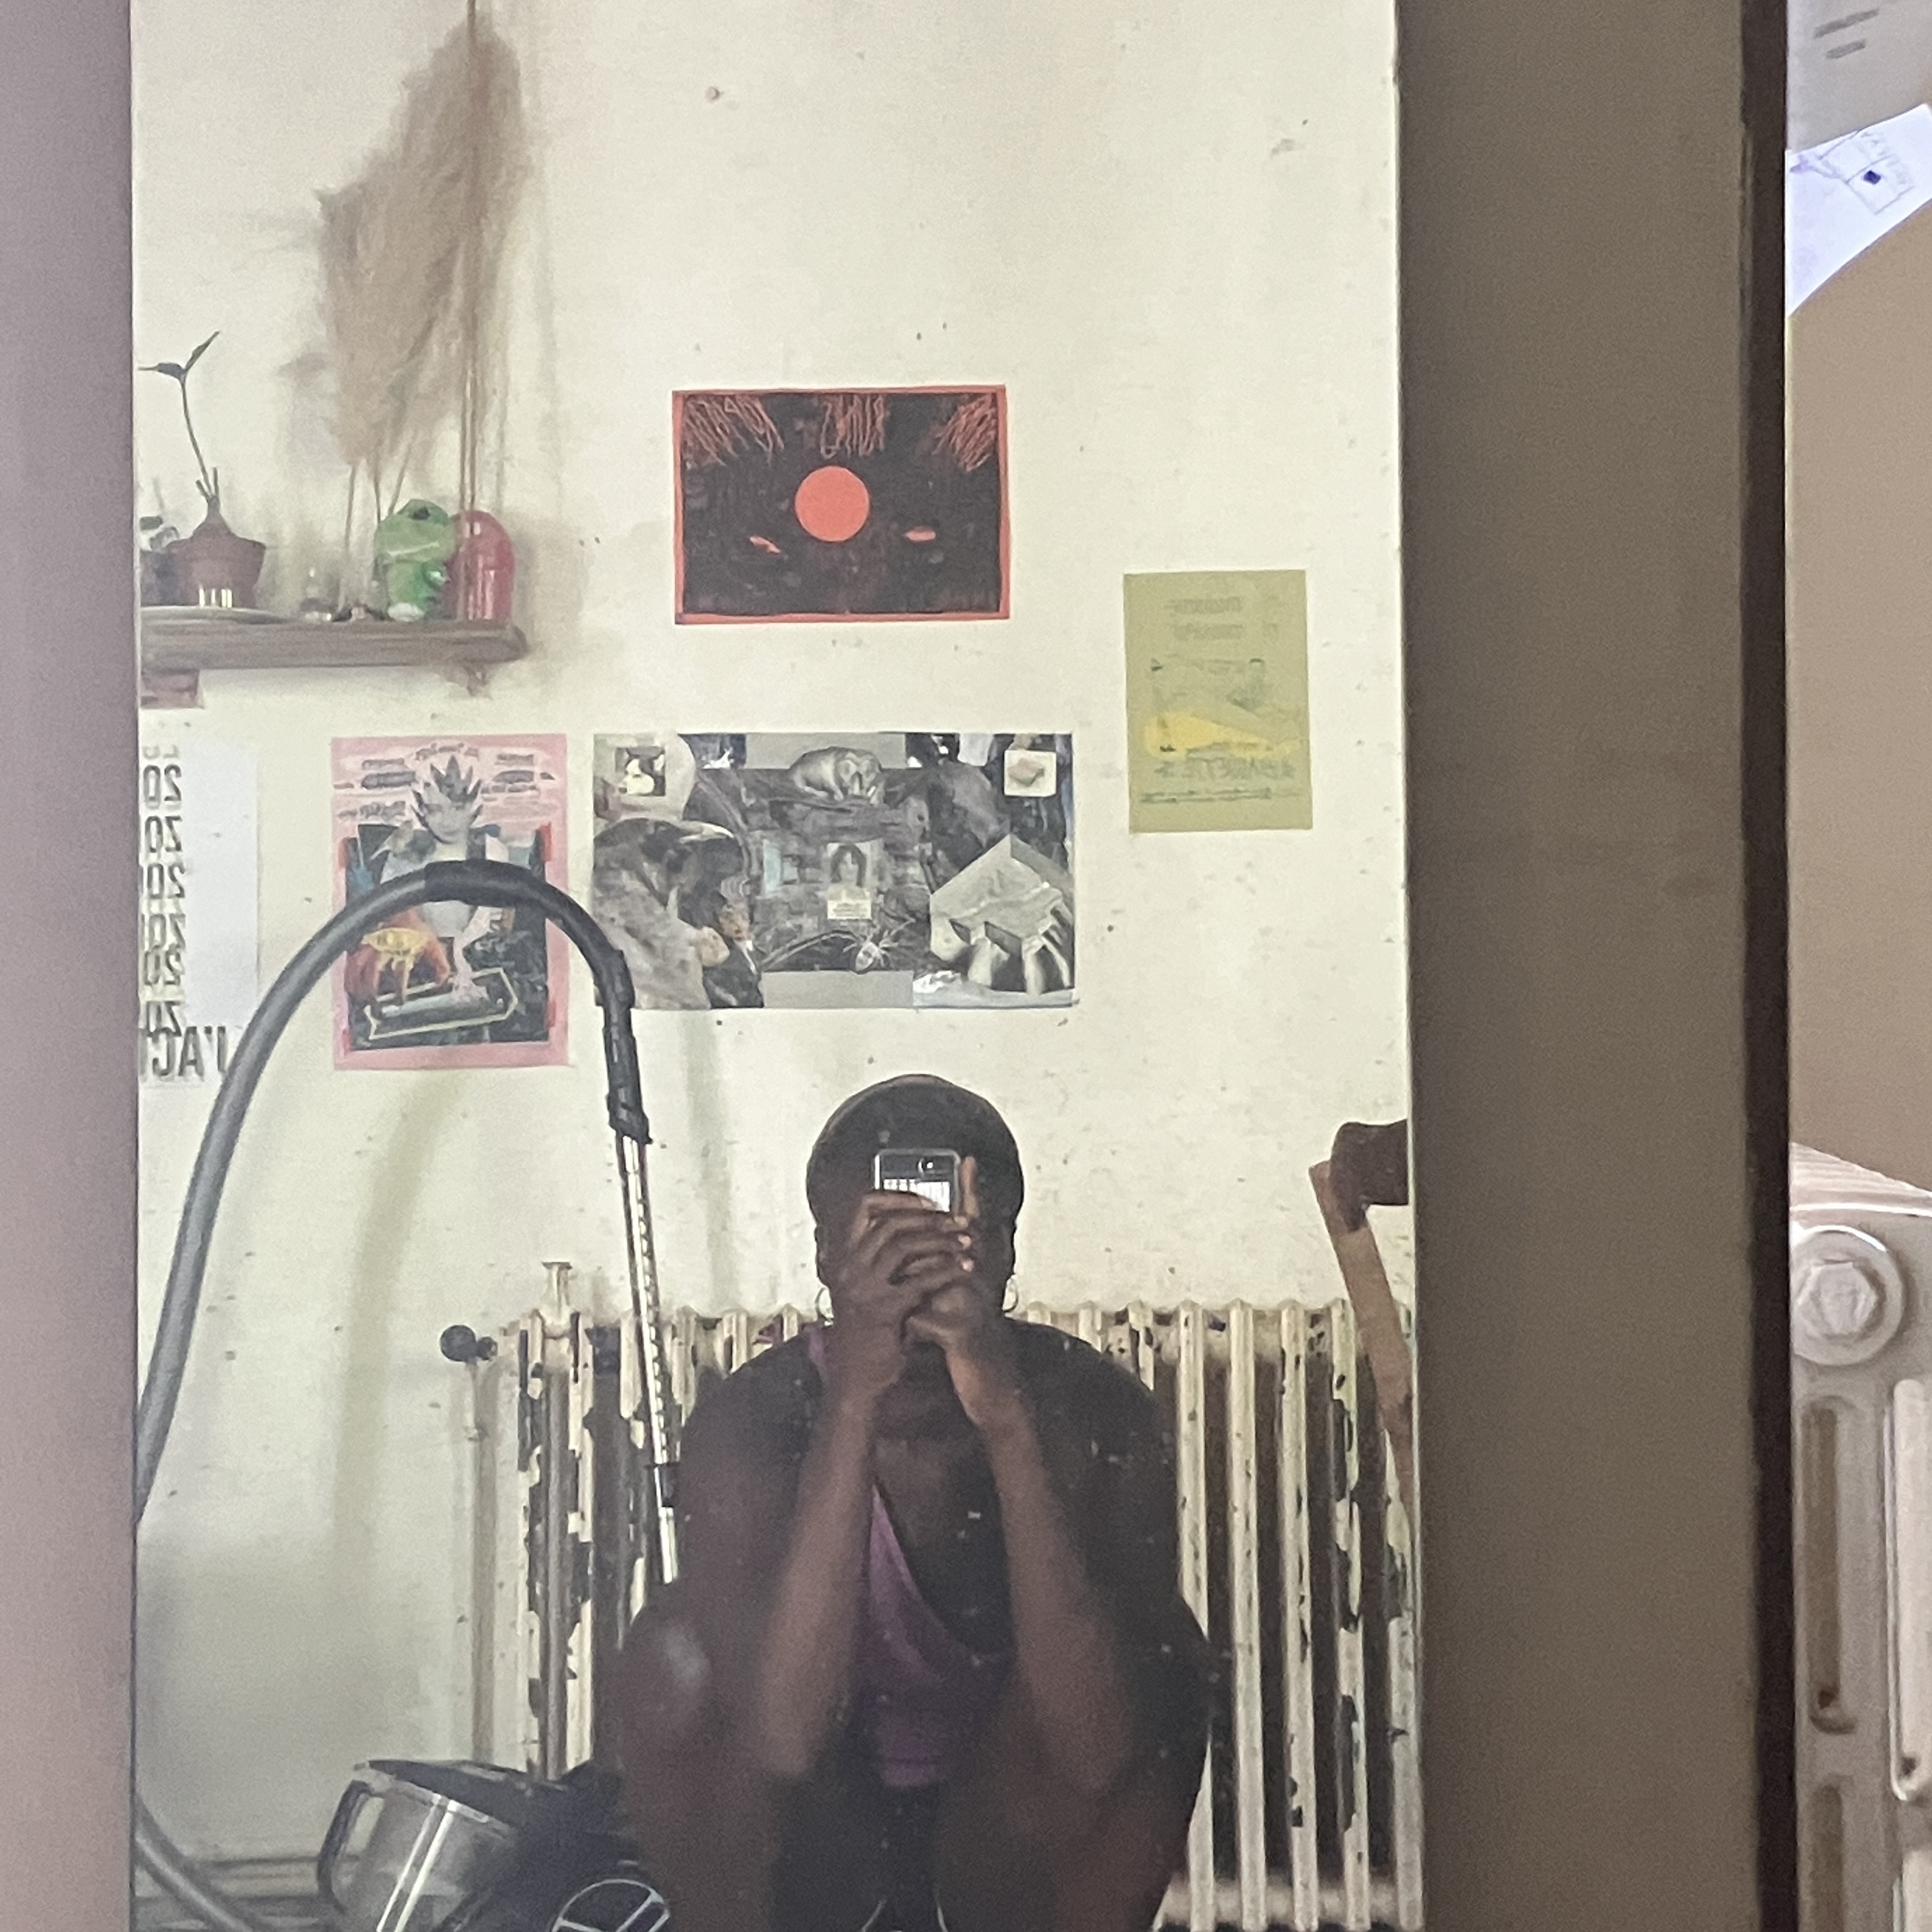 artist alero (a black non-binary person) takes a selfie in the mirror as they are squatting down on the floor with posters of various colours above their head